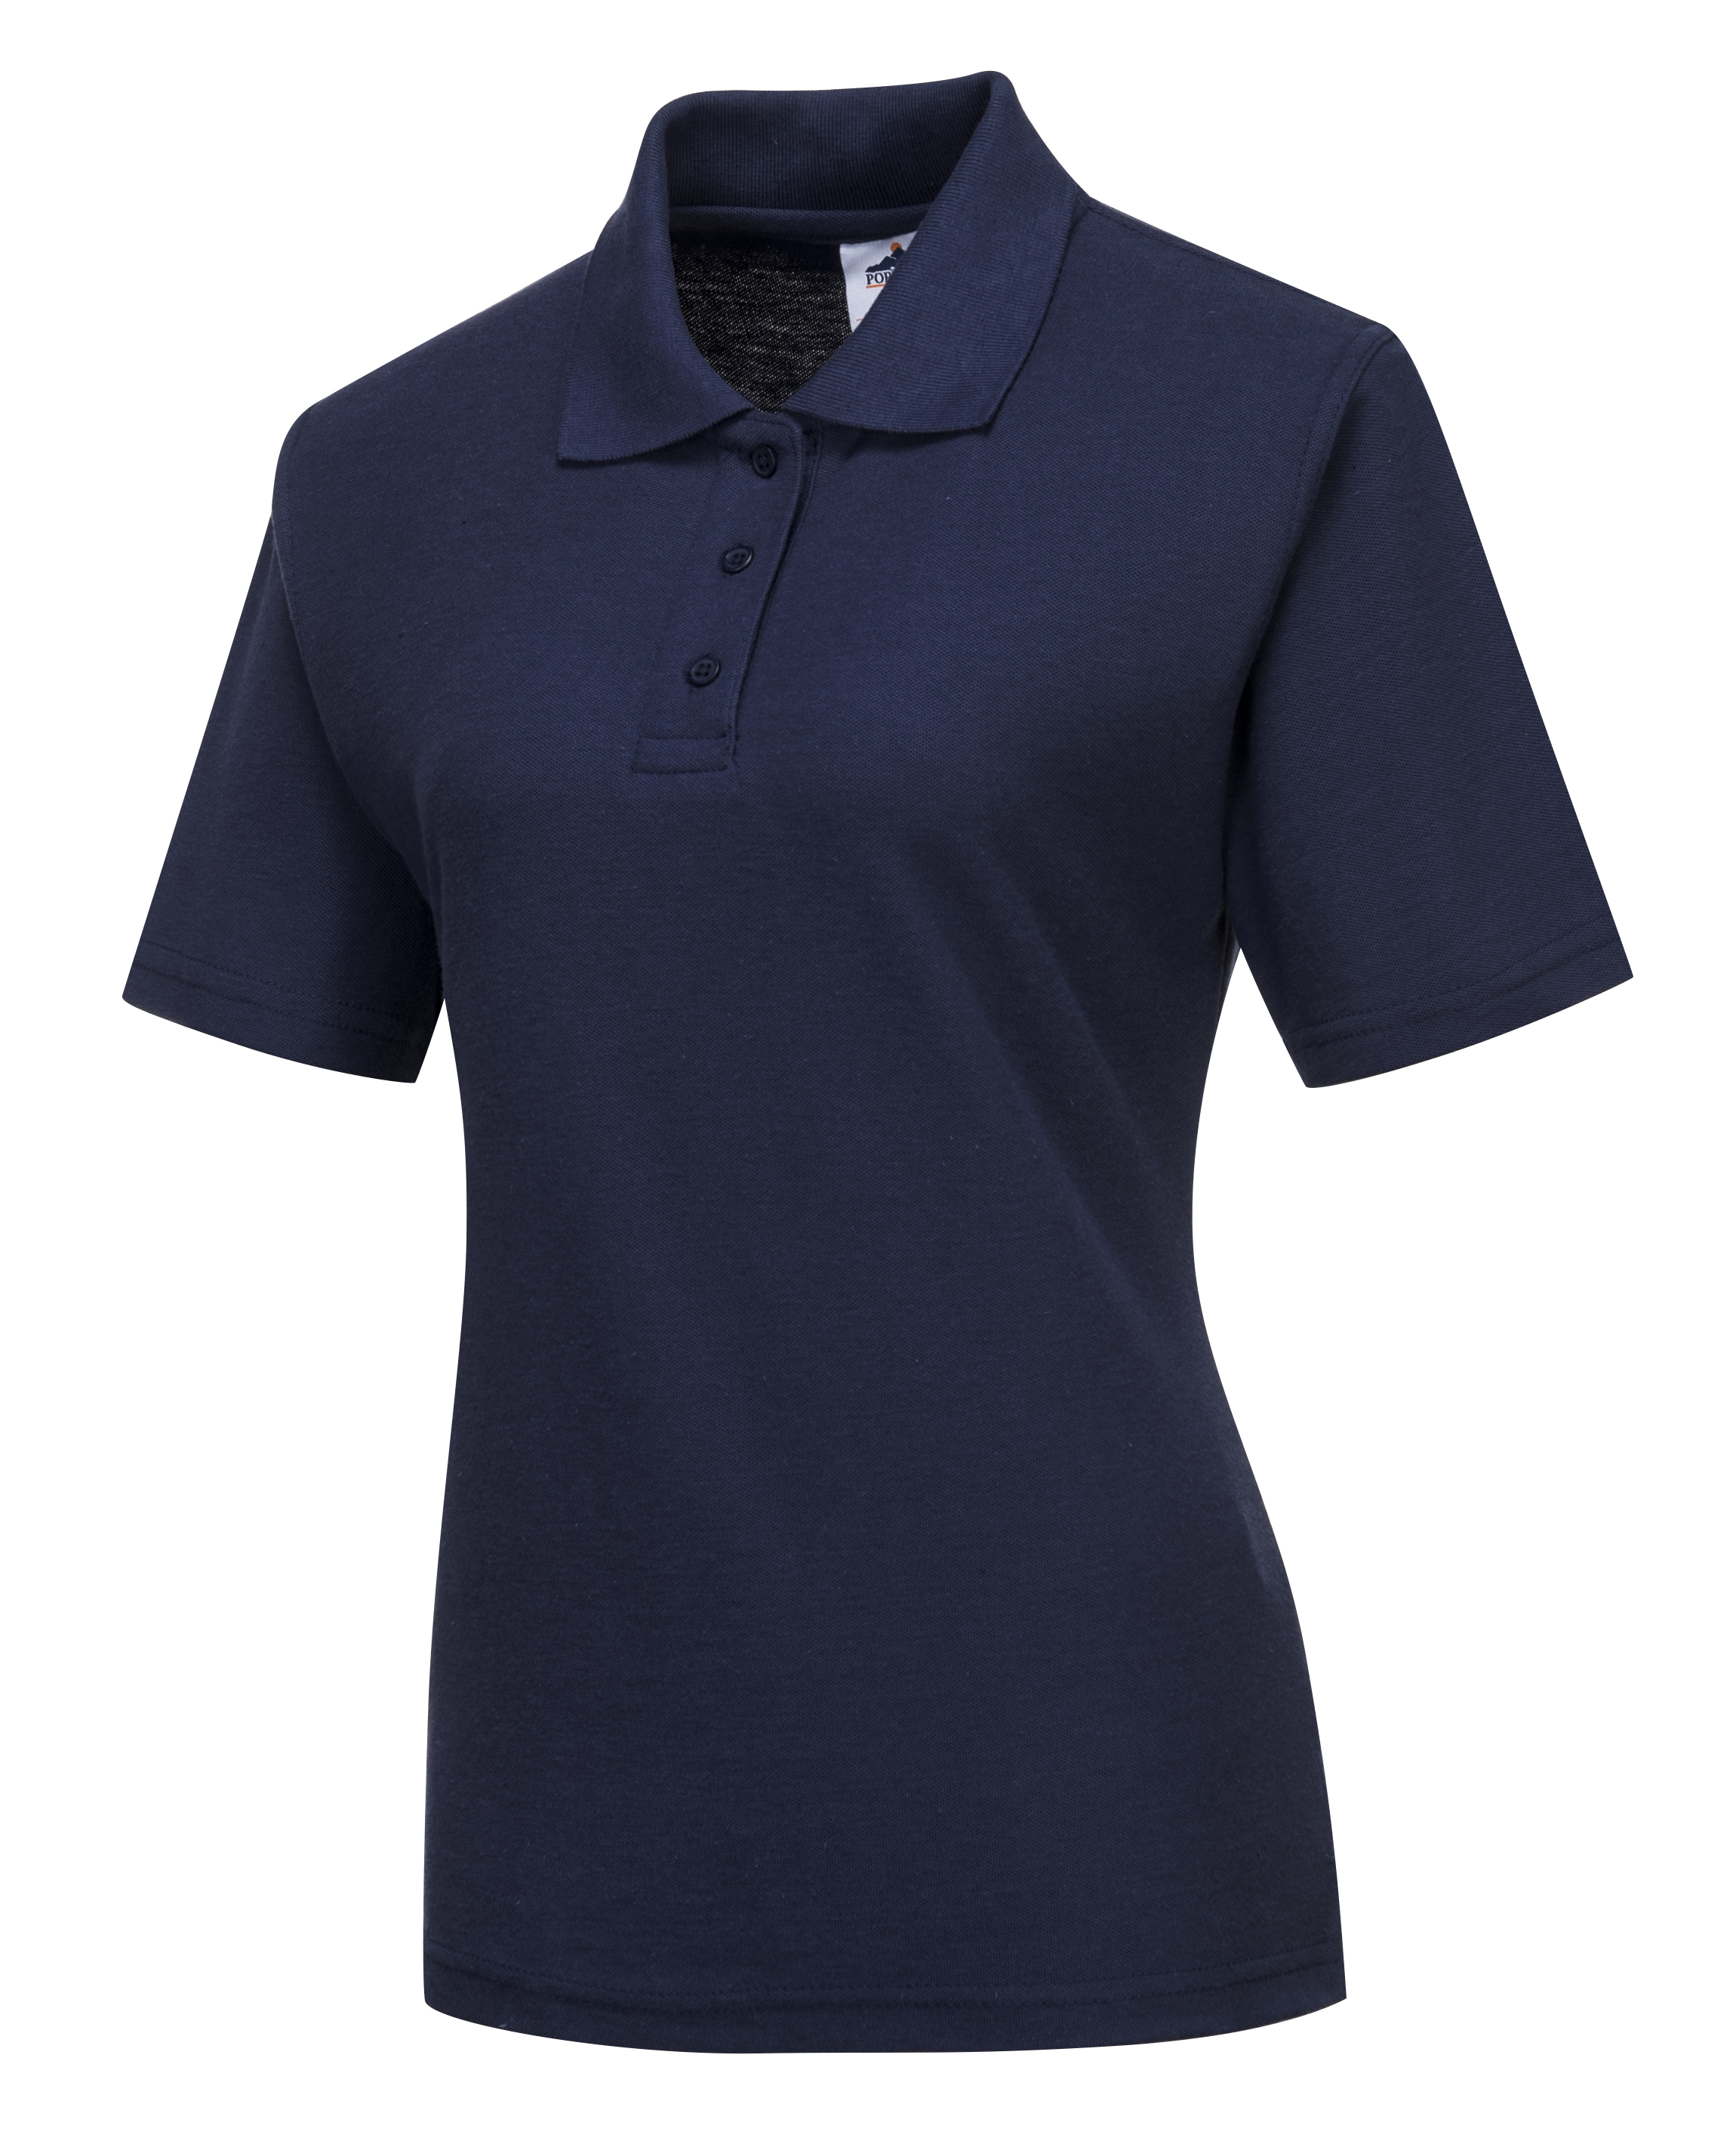 ax-httpss3.eu-west-2.amazonaws.comwebsystemstmp_for_downloadportwest-naples-ladies-polo-shirt-navy.jpeg